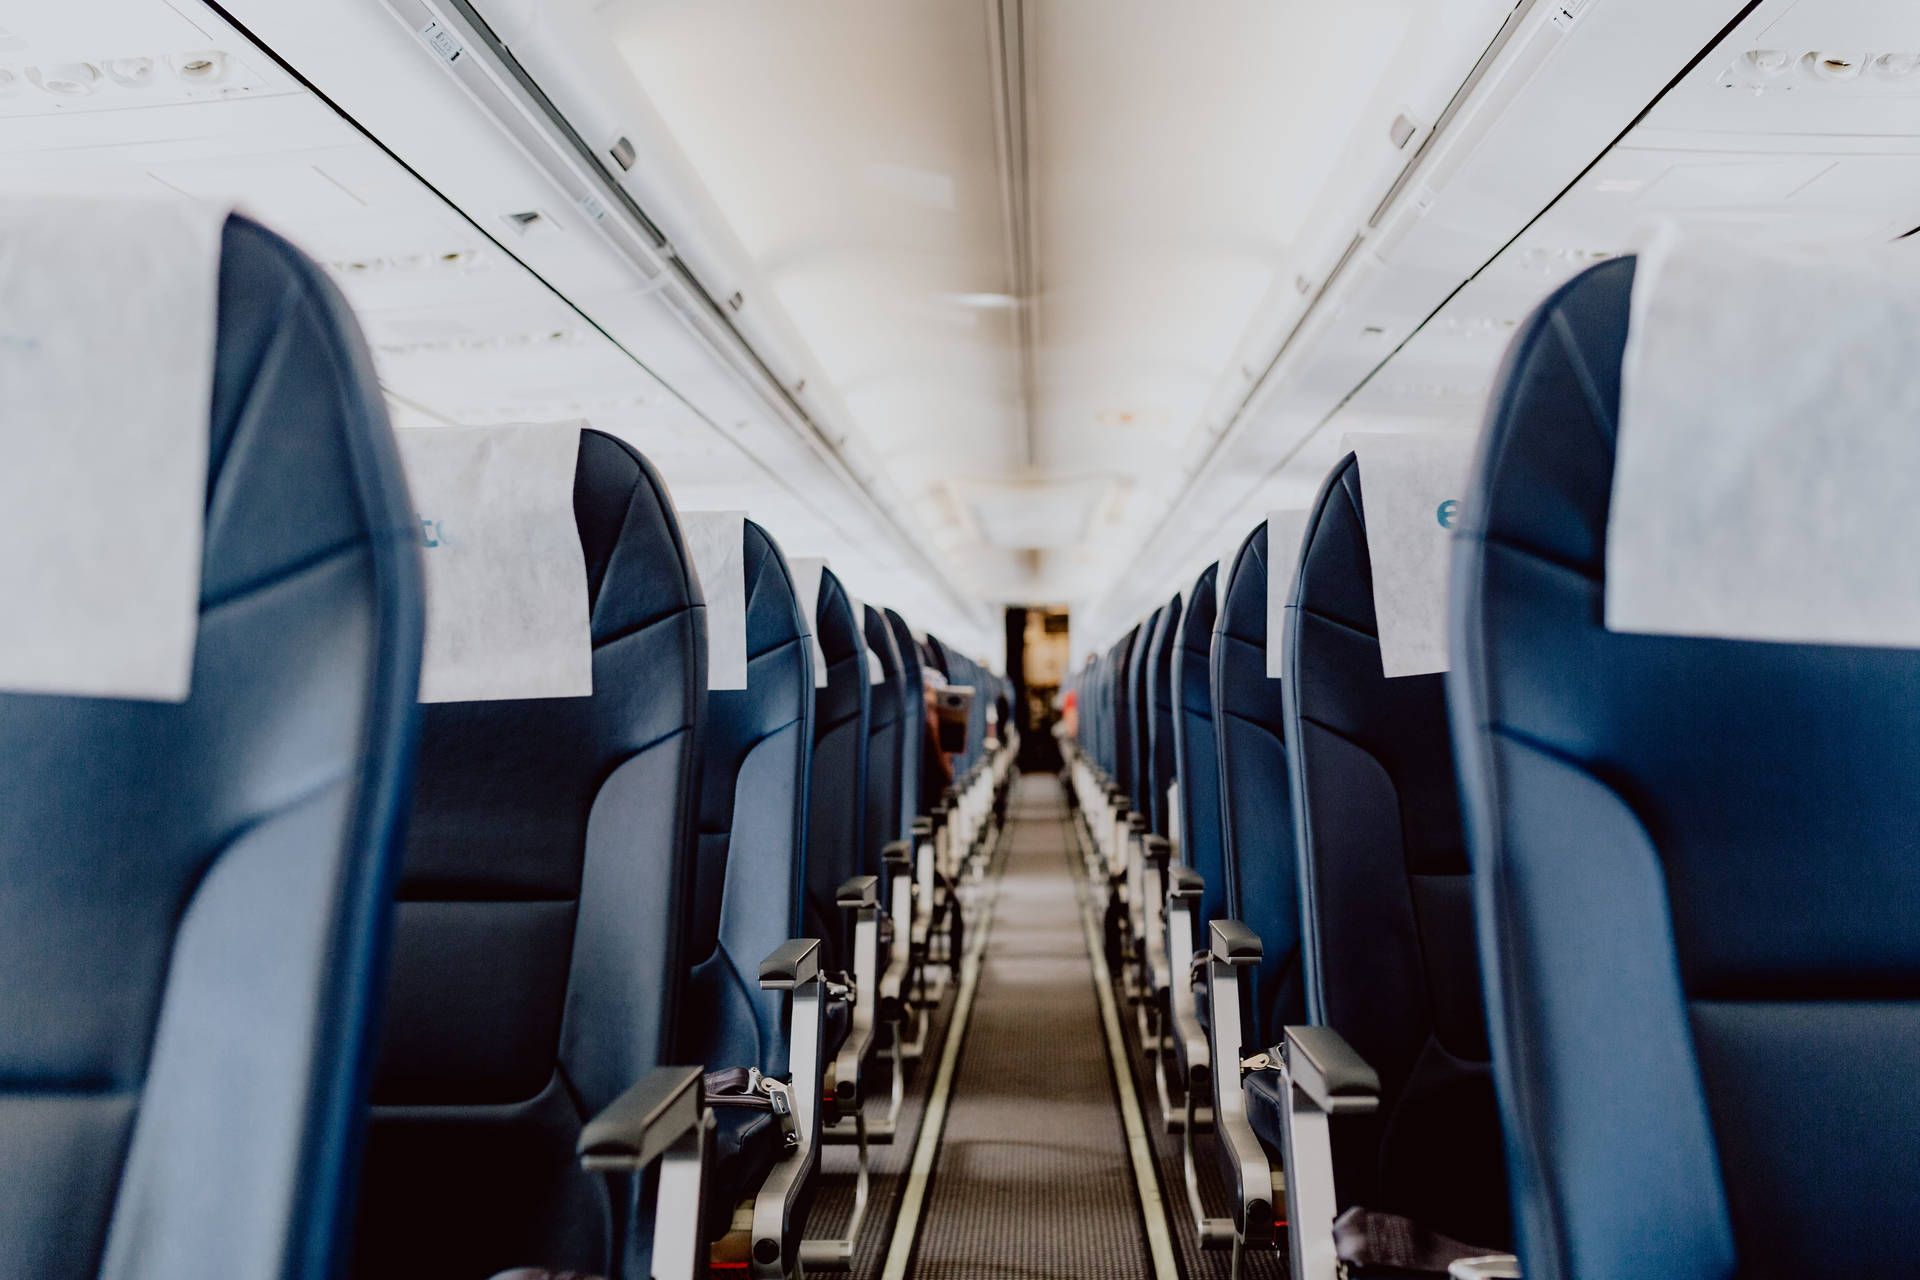 Chairs Inside Airplane 4K Wallpaper